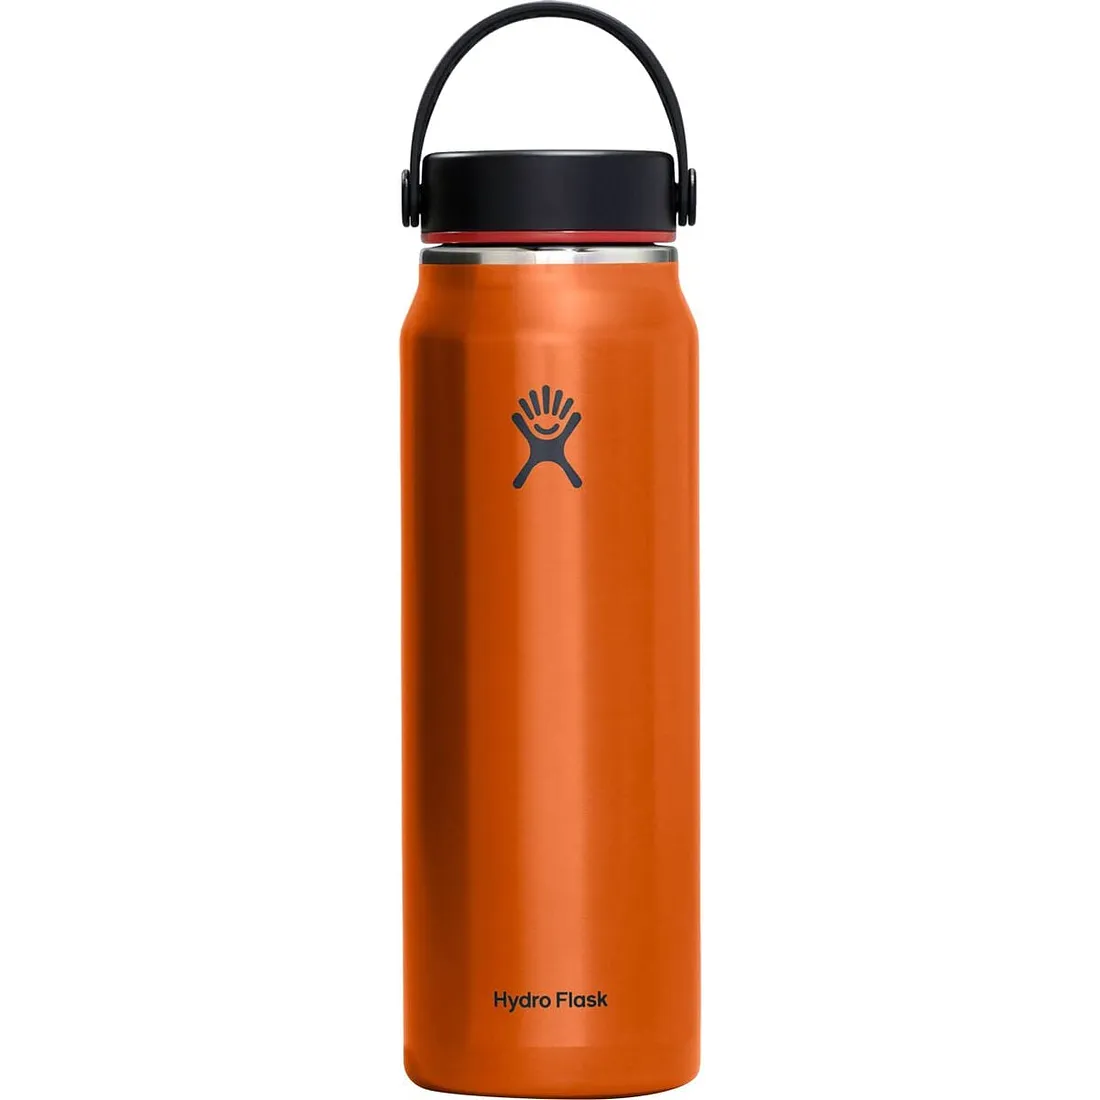 Hydro Flask Lightweight Wide Mouth Trail Series 32 oz Hiking Water Bottle